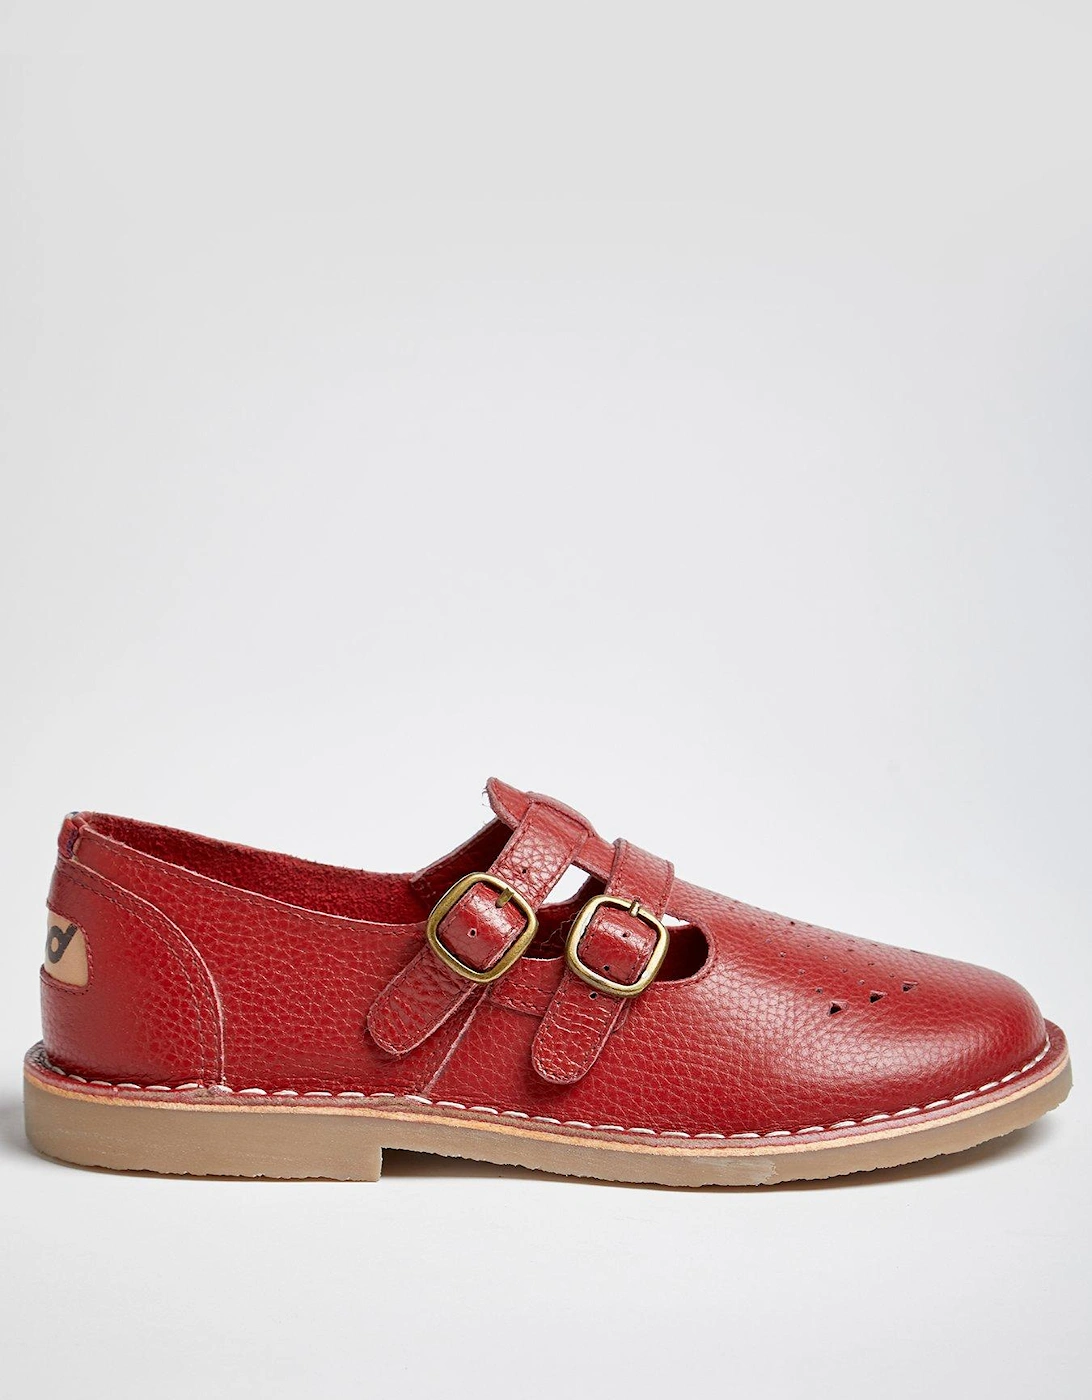 Originals Marley Leather Buckle Mary Janes - Red, 2 of 1